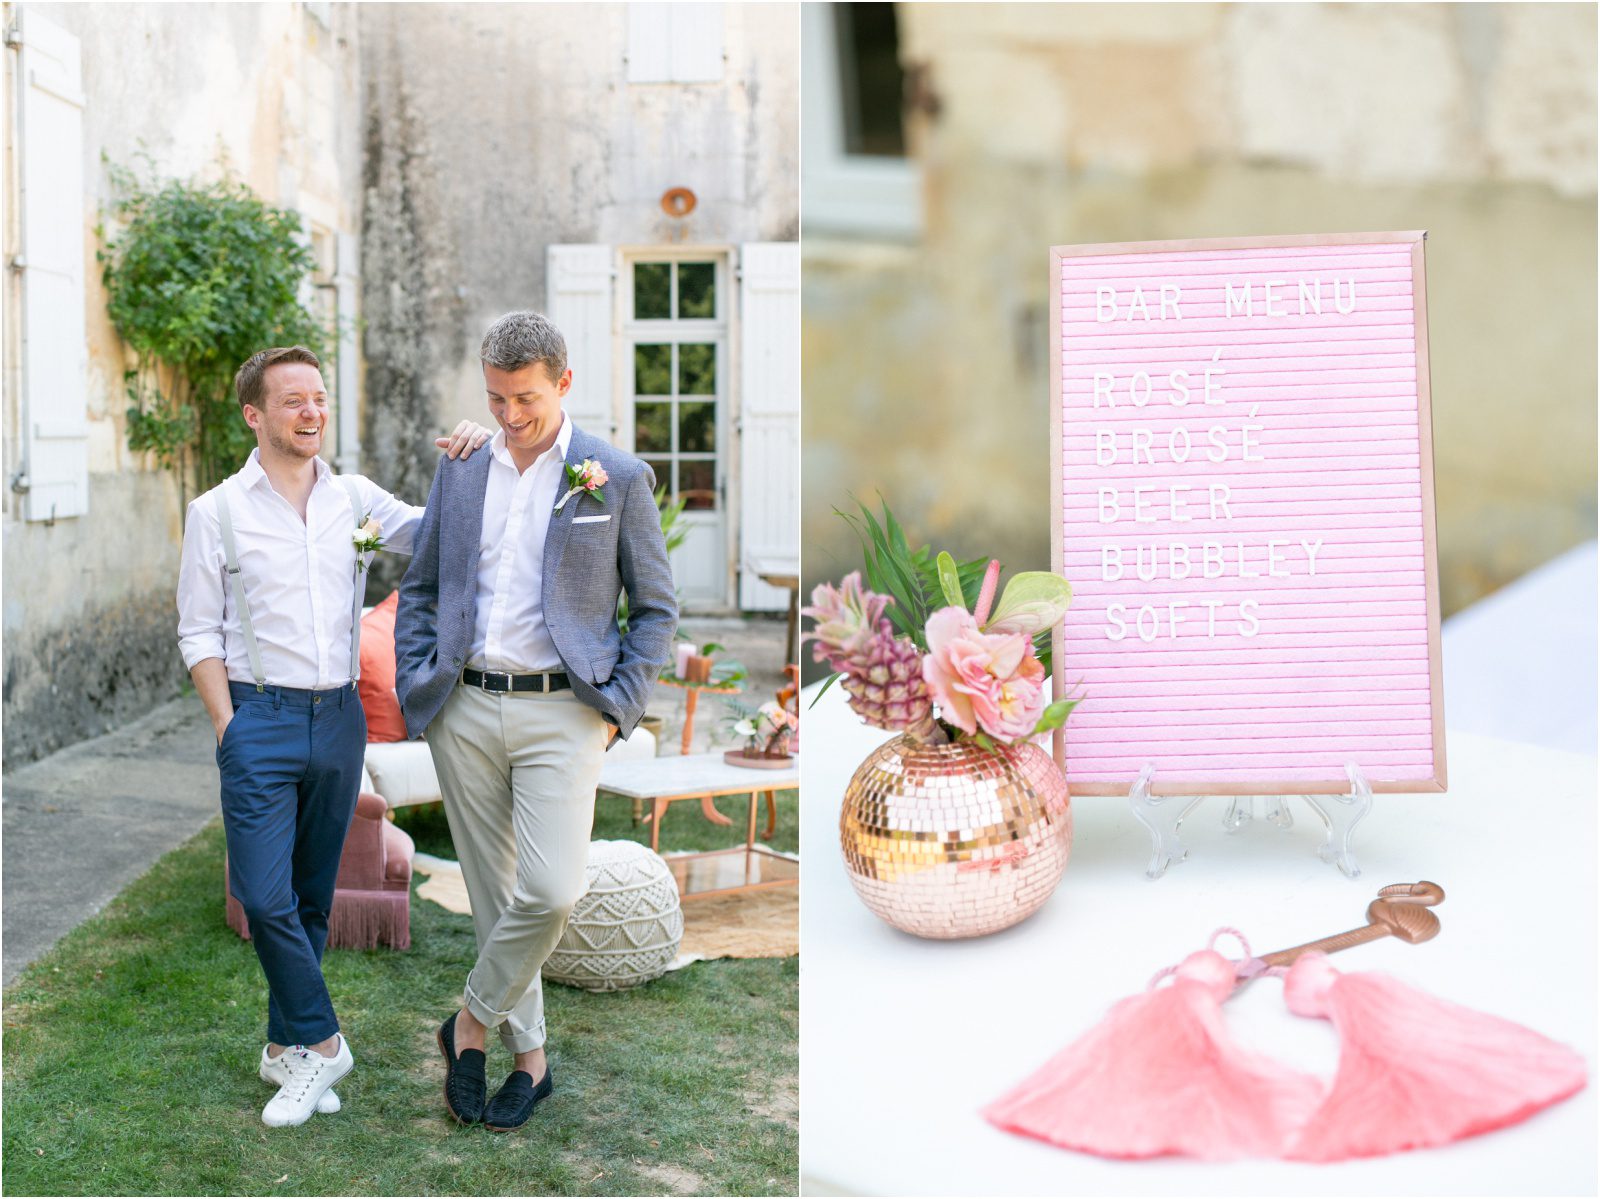 French Tropical Chic wedding in the Dordogne